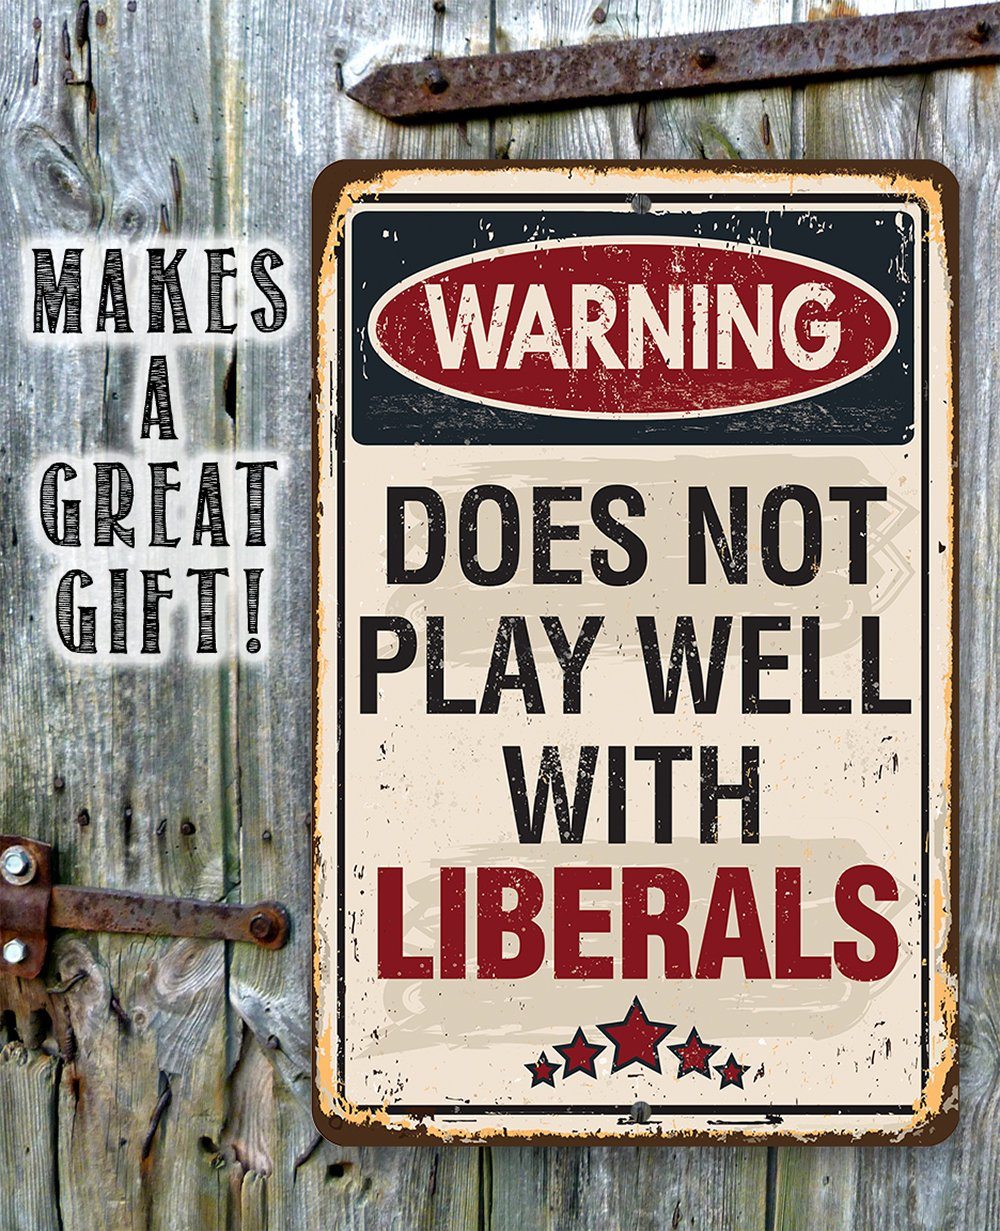 Warning Does Not Play Well With Liberals - Metal Sign | Lone Star Art.